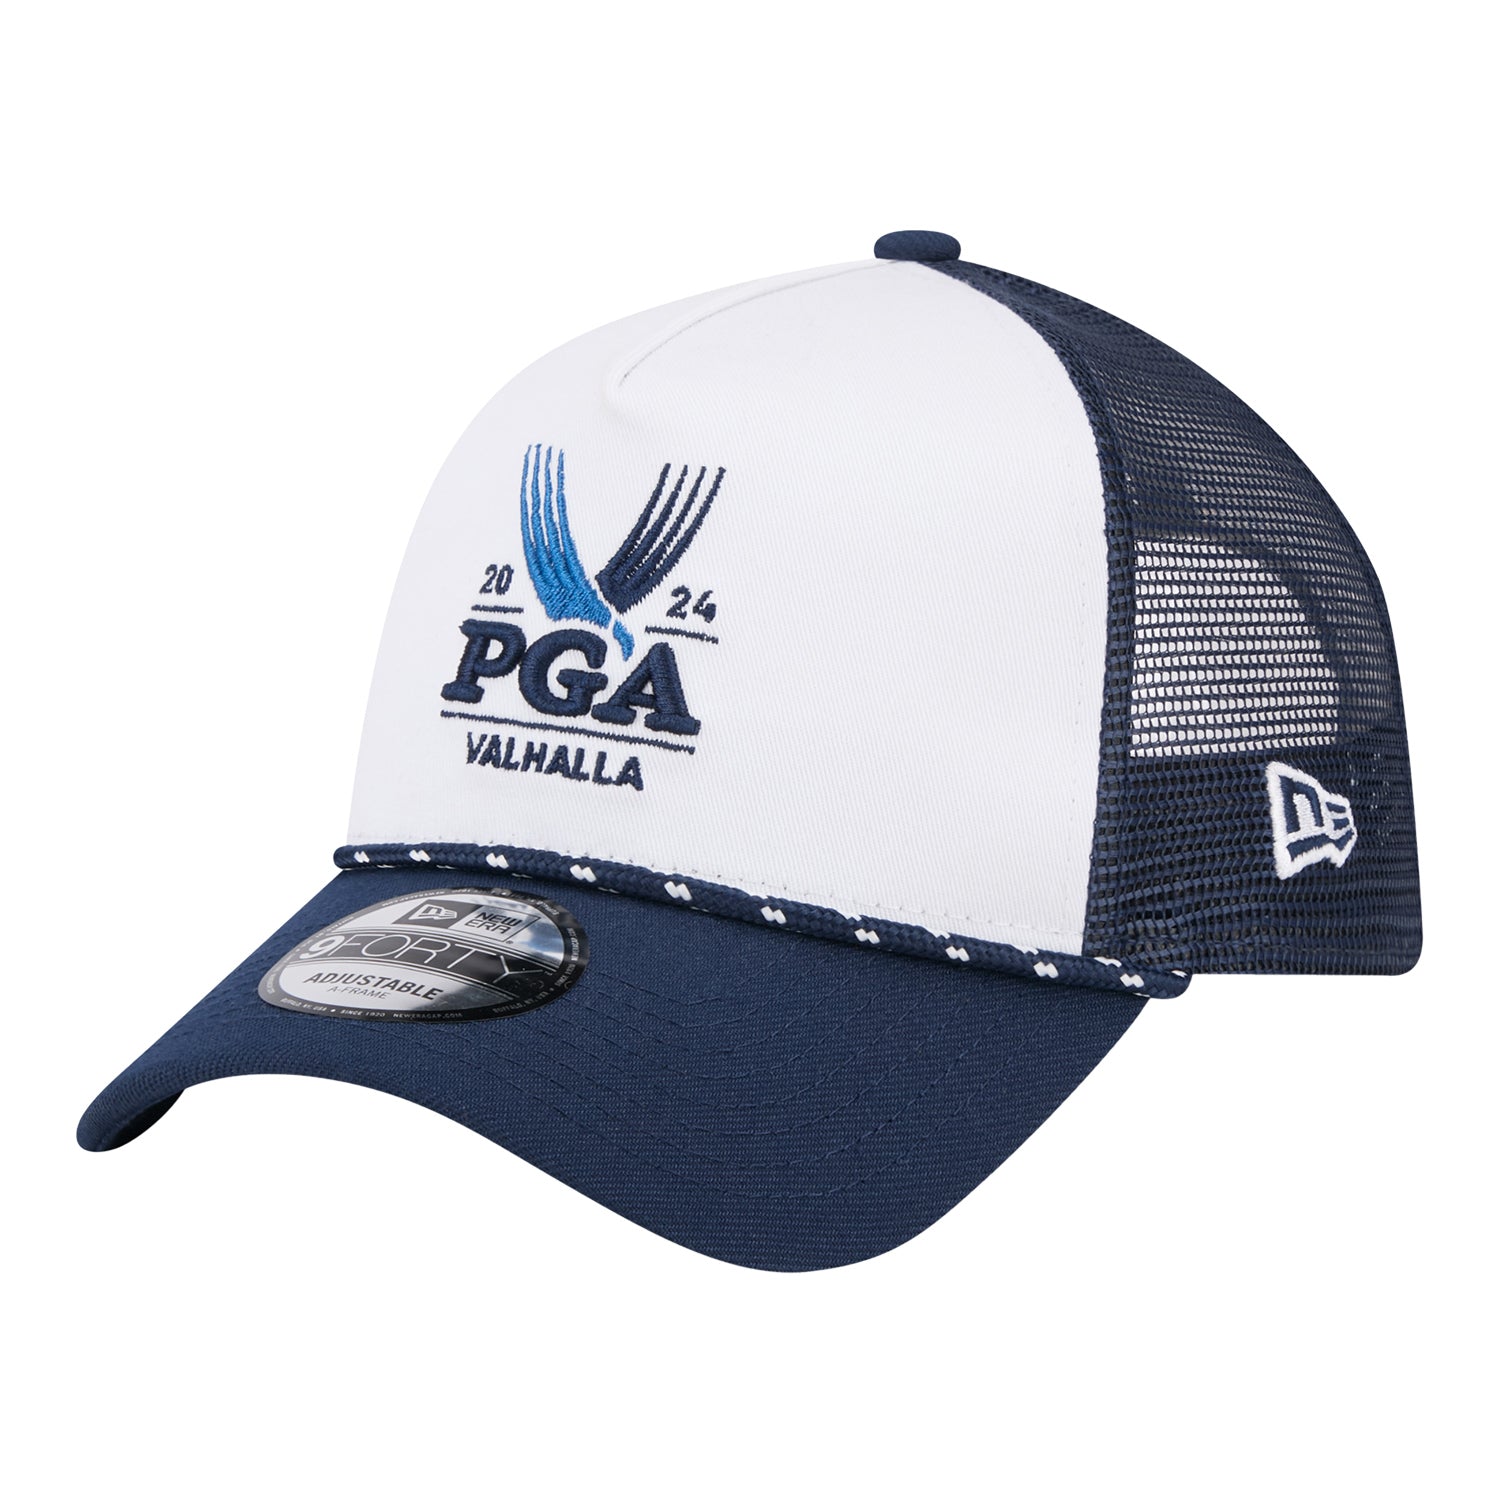 New Era 2024 PGA Championship Adjustable Trucker Hat in White and Navy - Angled Front Left View